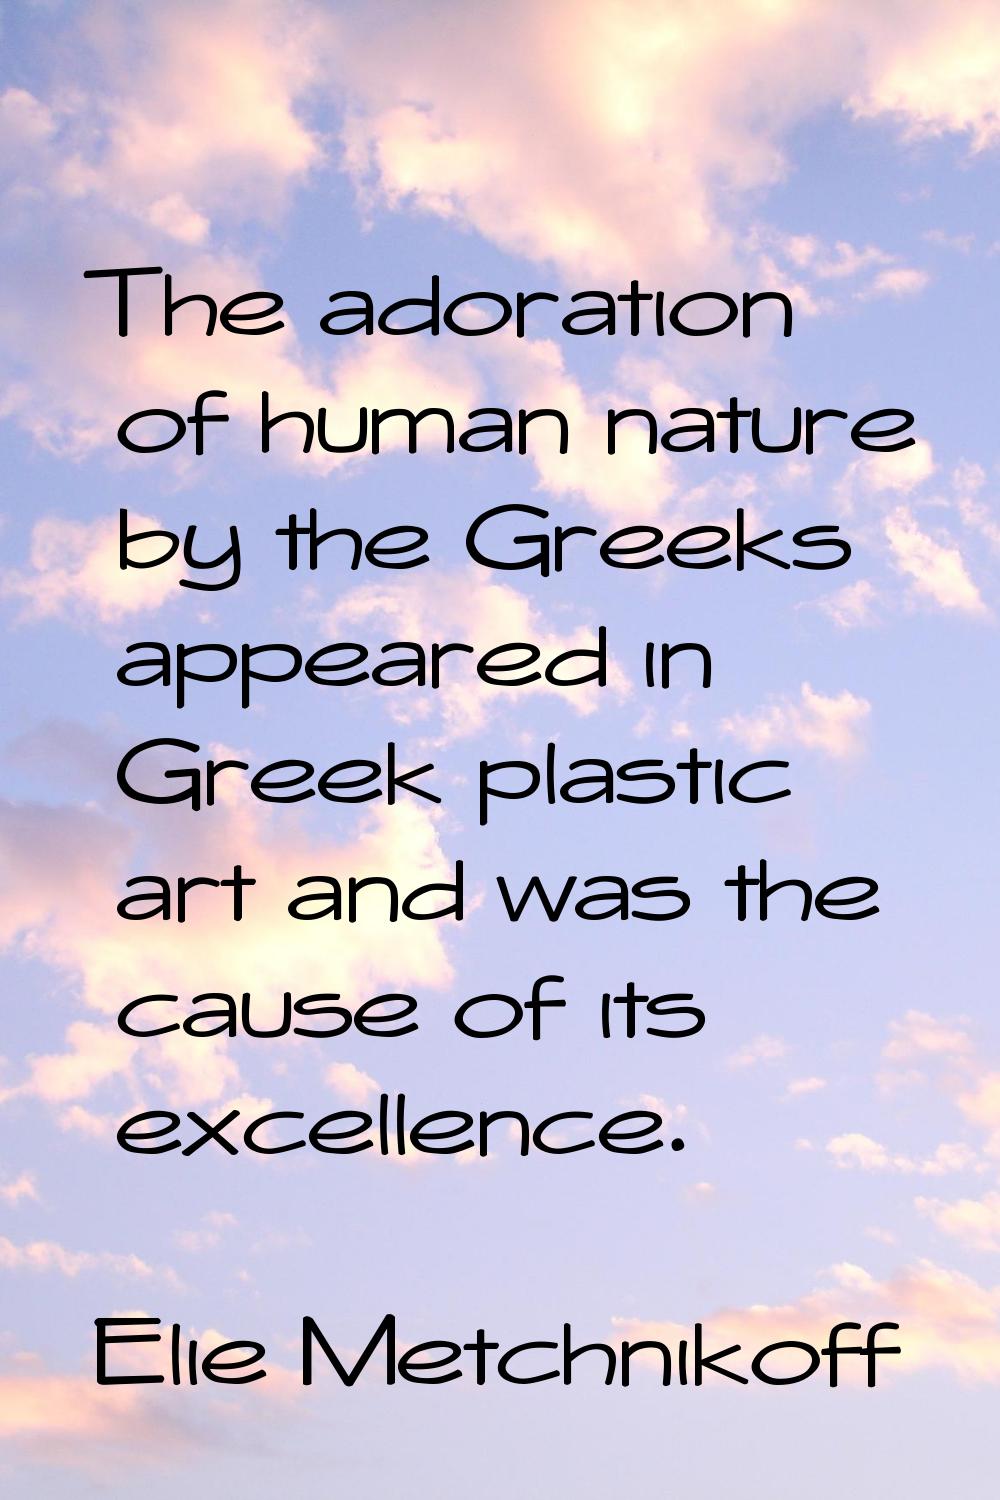 The adoration of human nature by the Greeks appeared in Greek plastic art and was the cause of its 